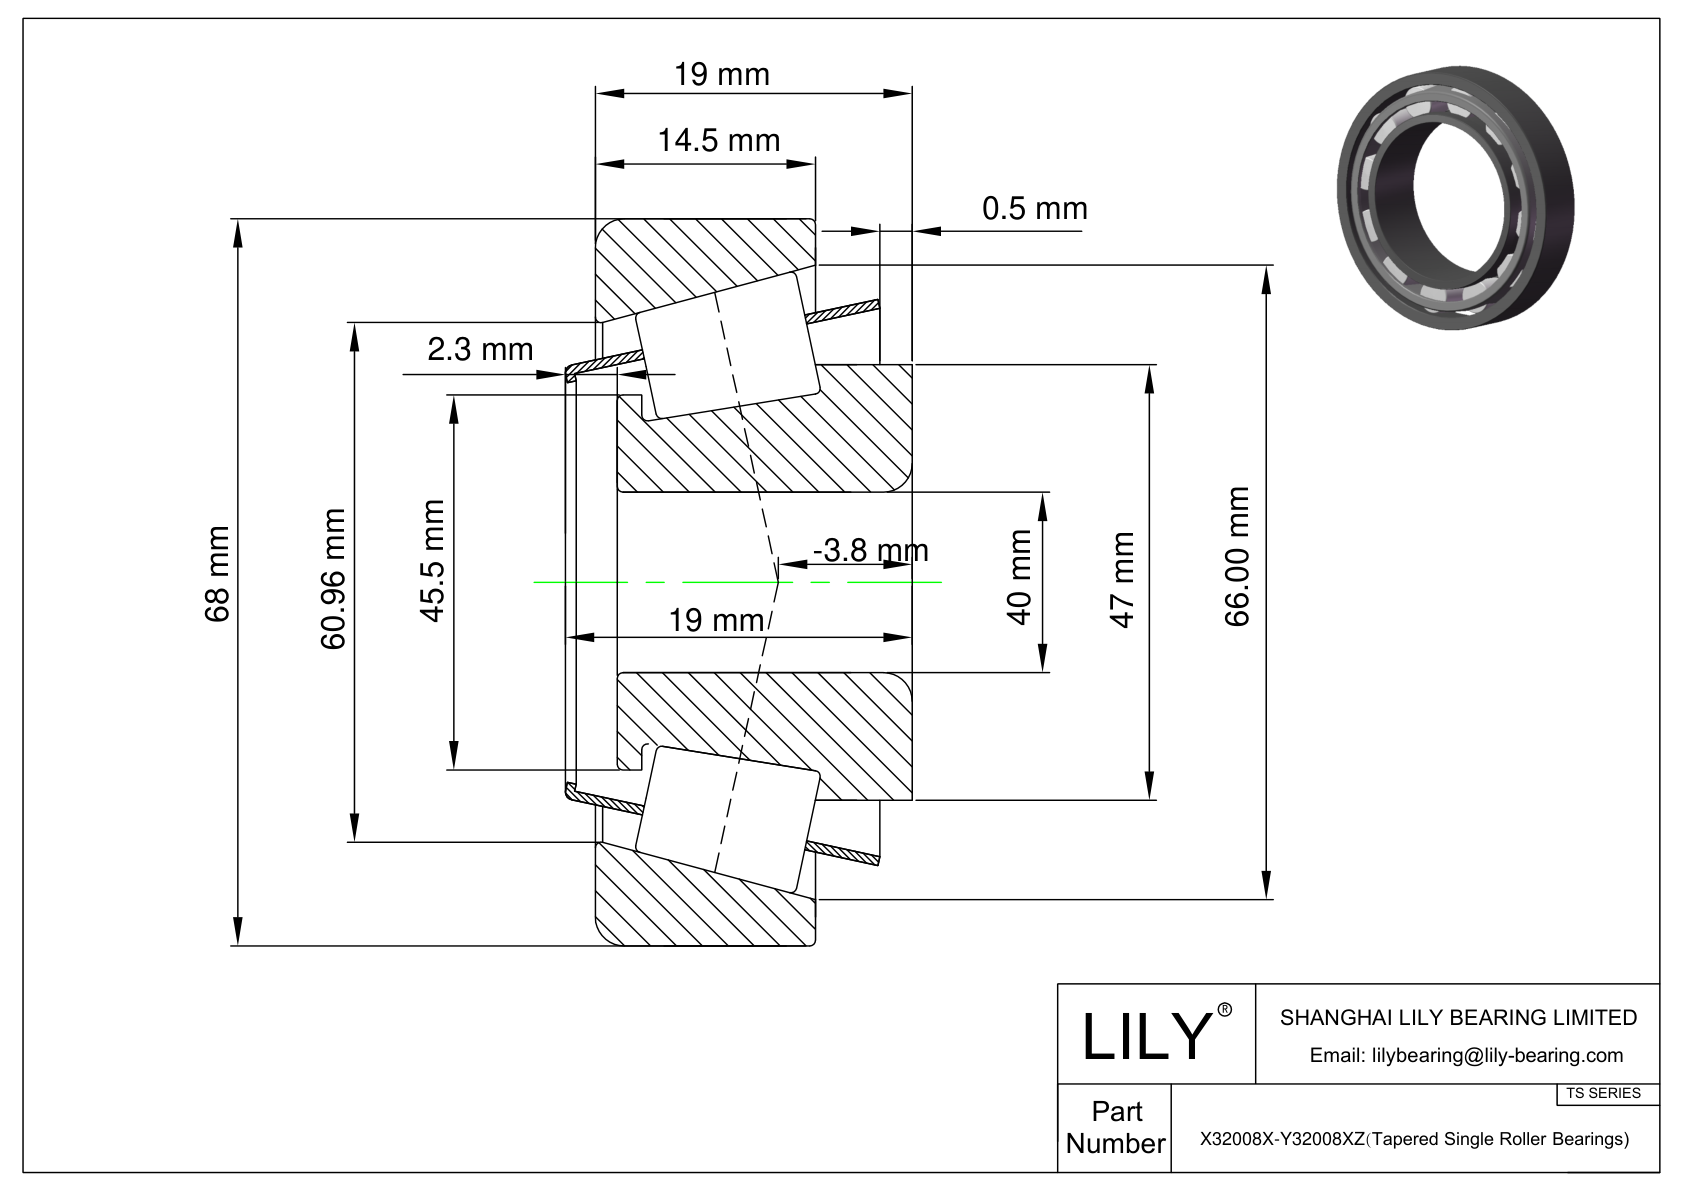 X32008X-Y32008XZ TS (Tapered Single Roller Bearings) (Metric) cad drawing